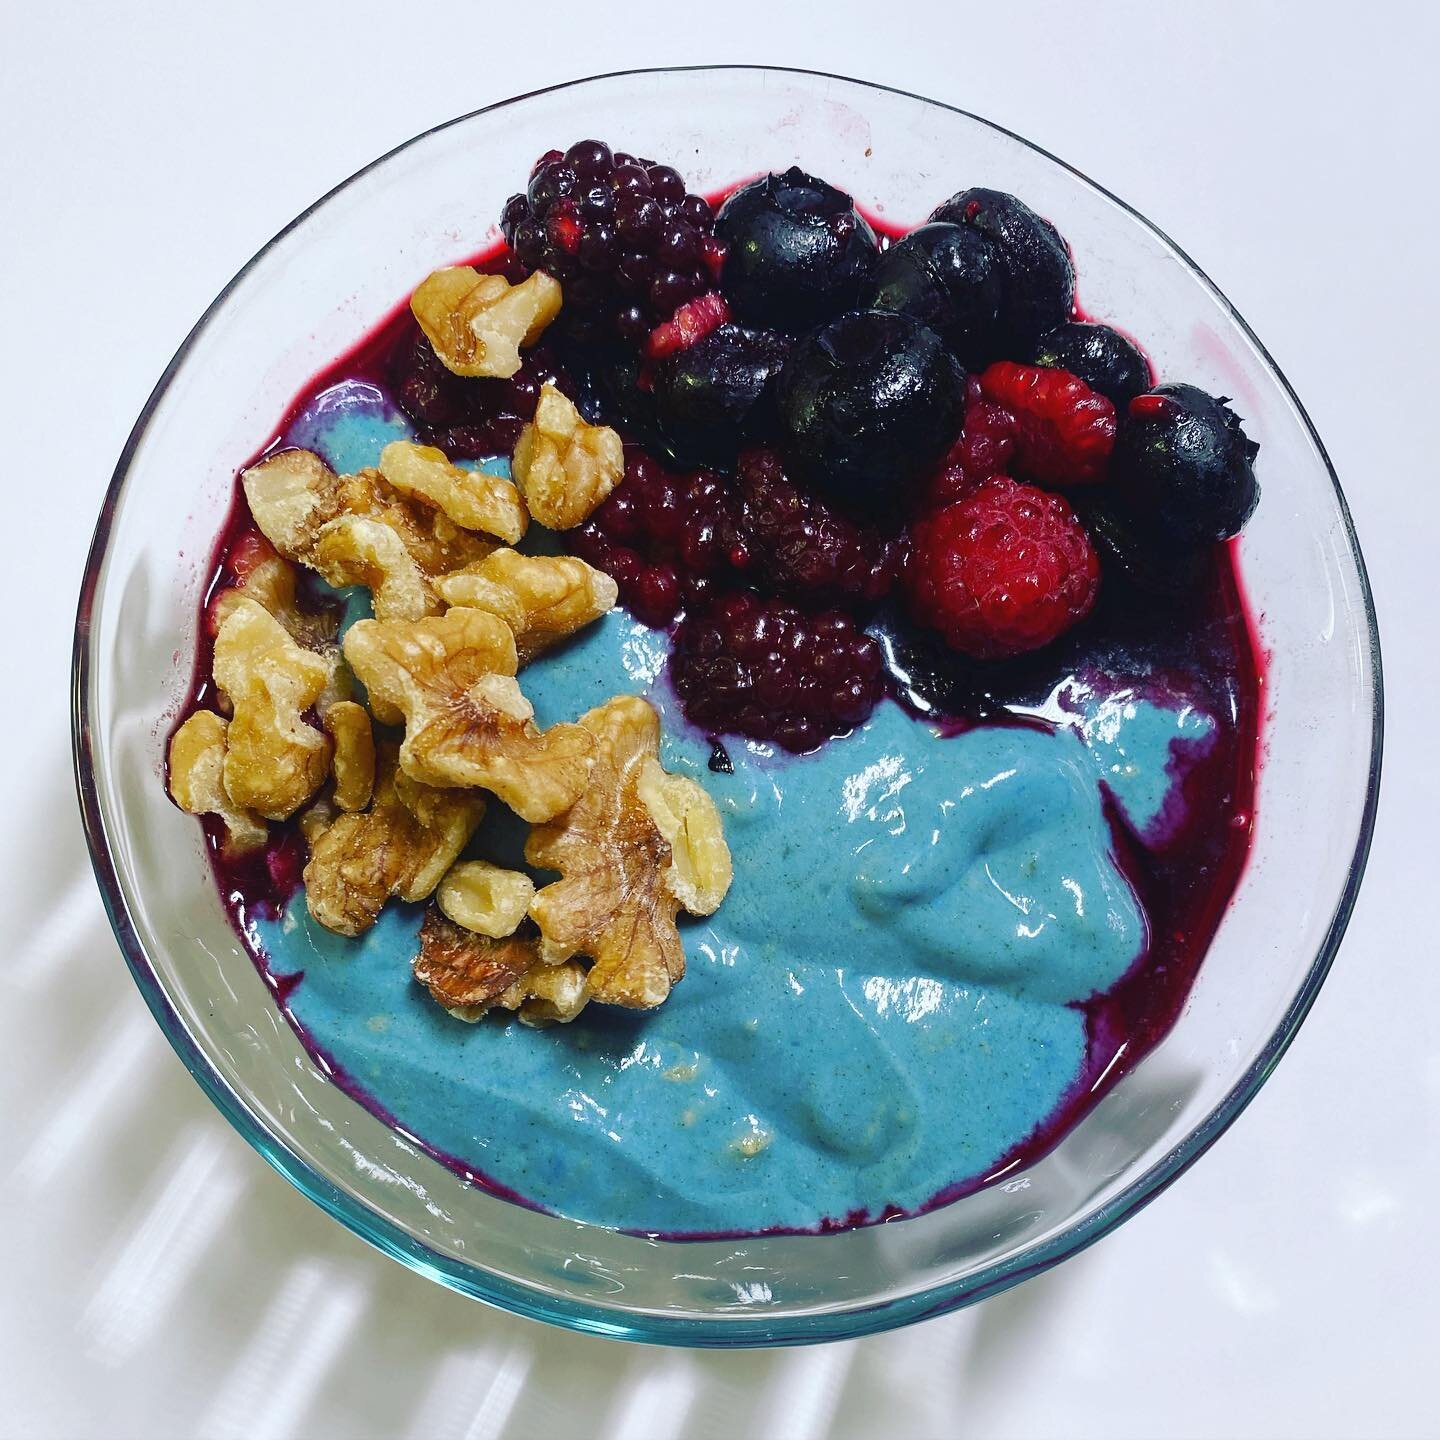 You are what you eat. Make it colorful 🦄

My favorite way to turn yogurt (or a smoothie) into a colorful creation is to add blue spirulina powder... also known as blue majik 🪄

This blue-green algae is a cyanobacteria that&rsquo;s called the most n